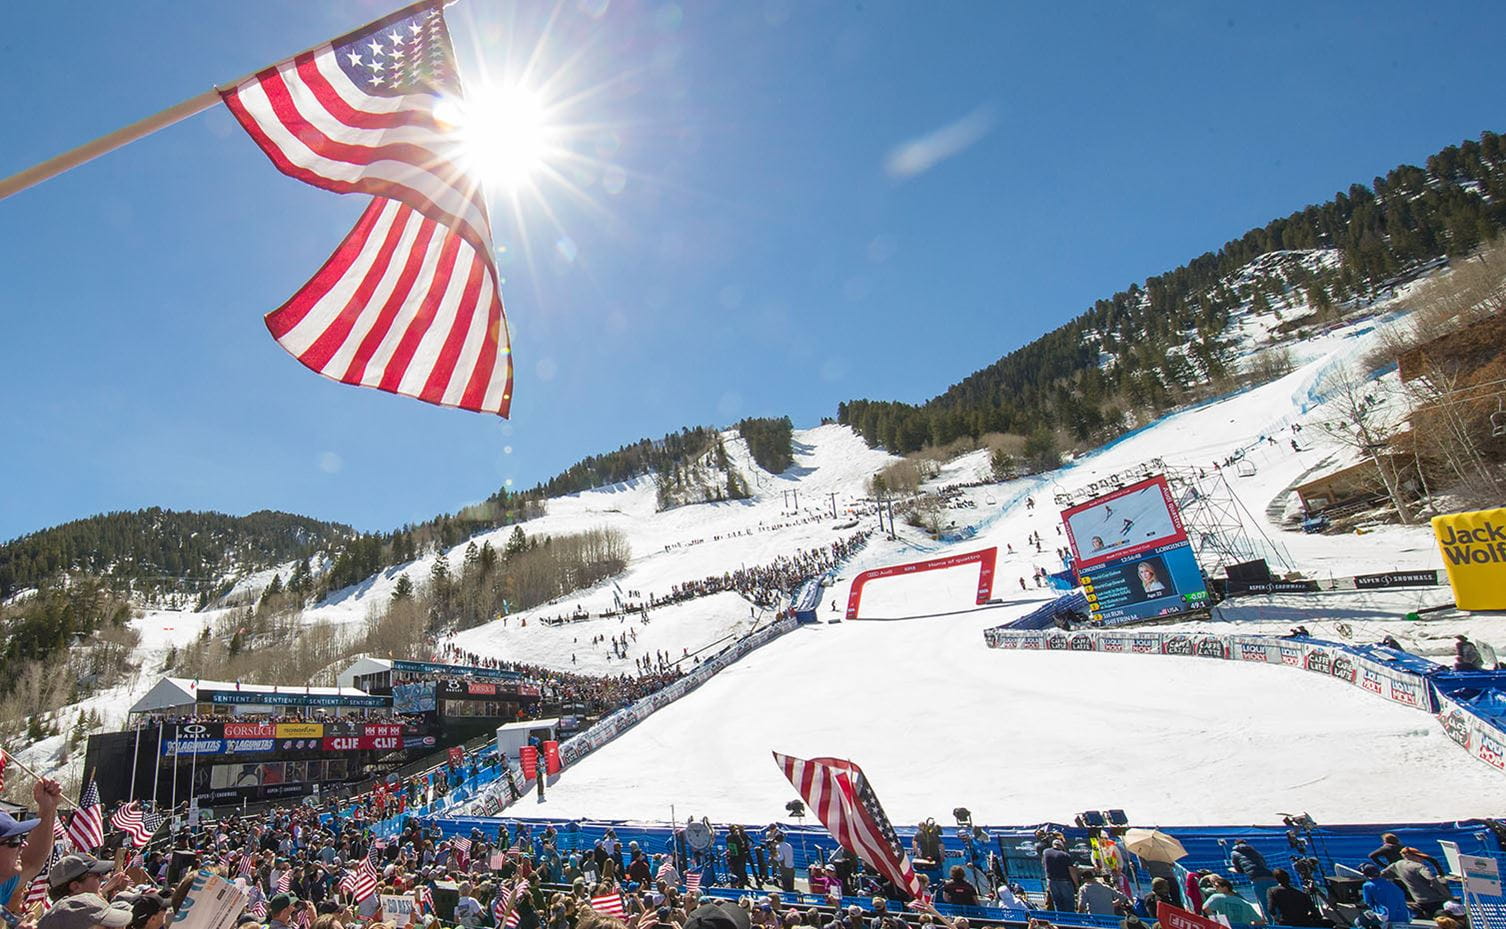 Audi FIS Ski World Cup Skiing Event at Aspen Snowmass